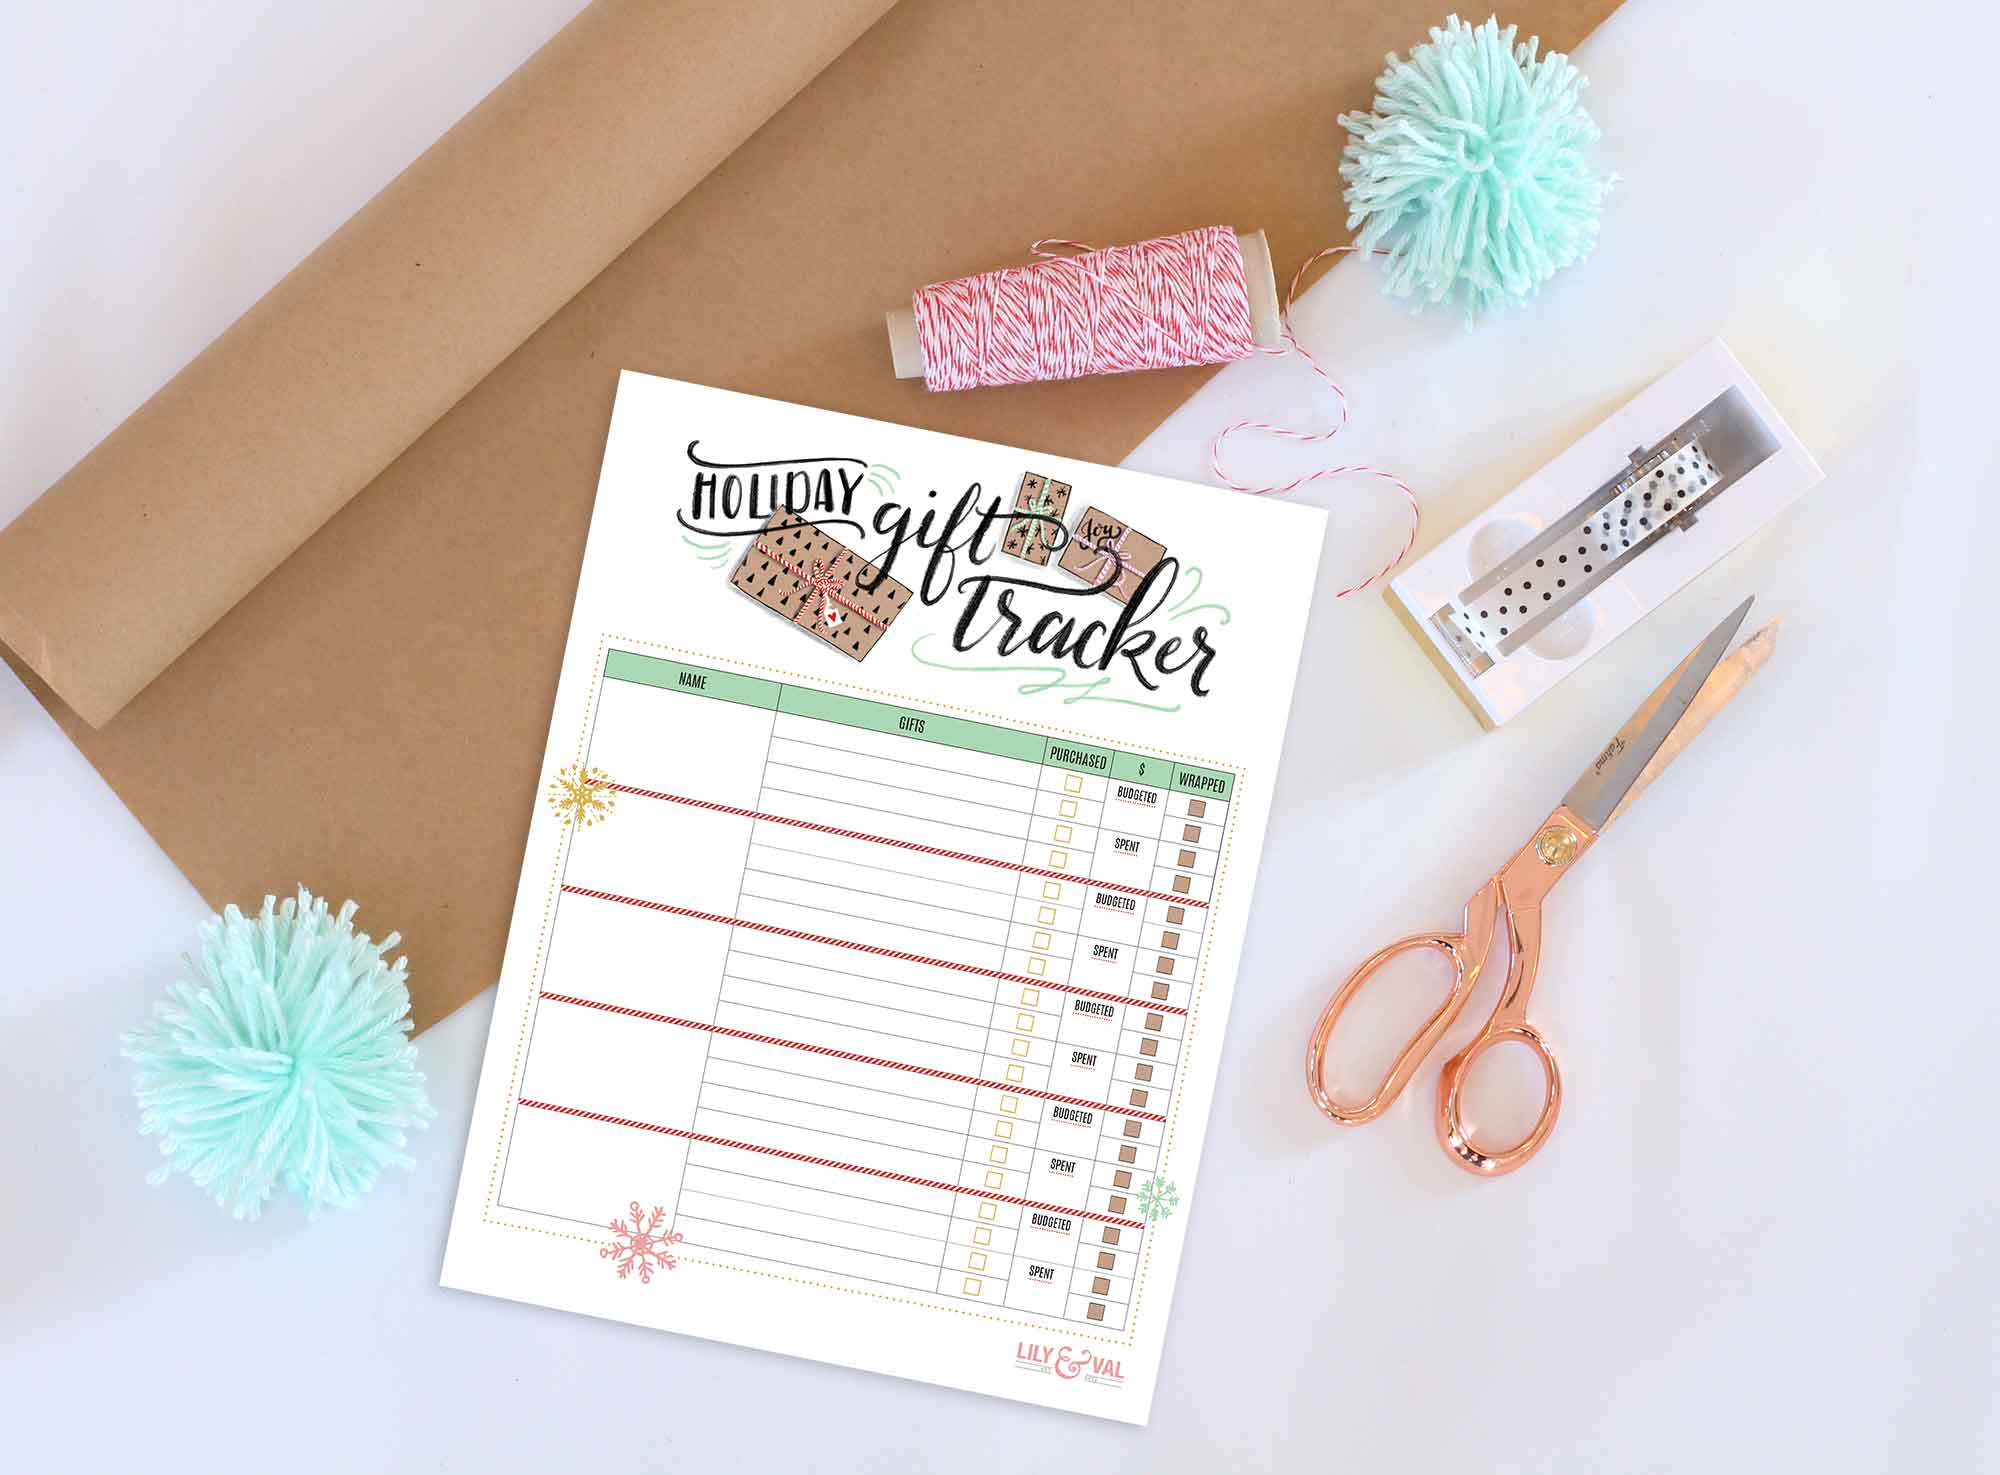 Download a free holiday gift tracker printable and make your gift buying organization simple! 